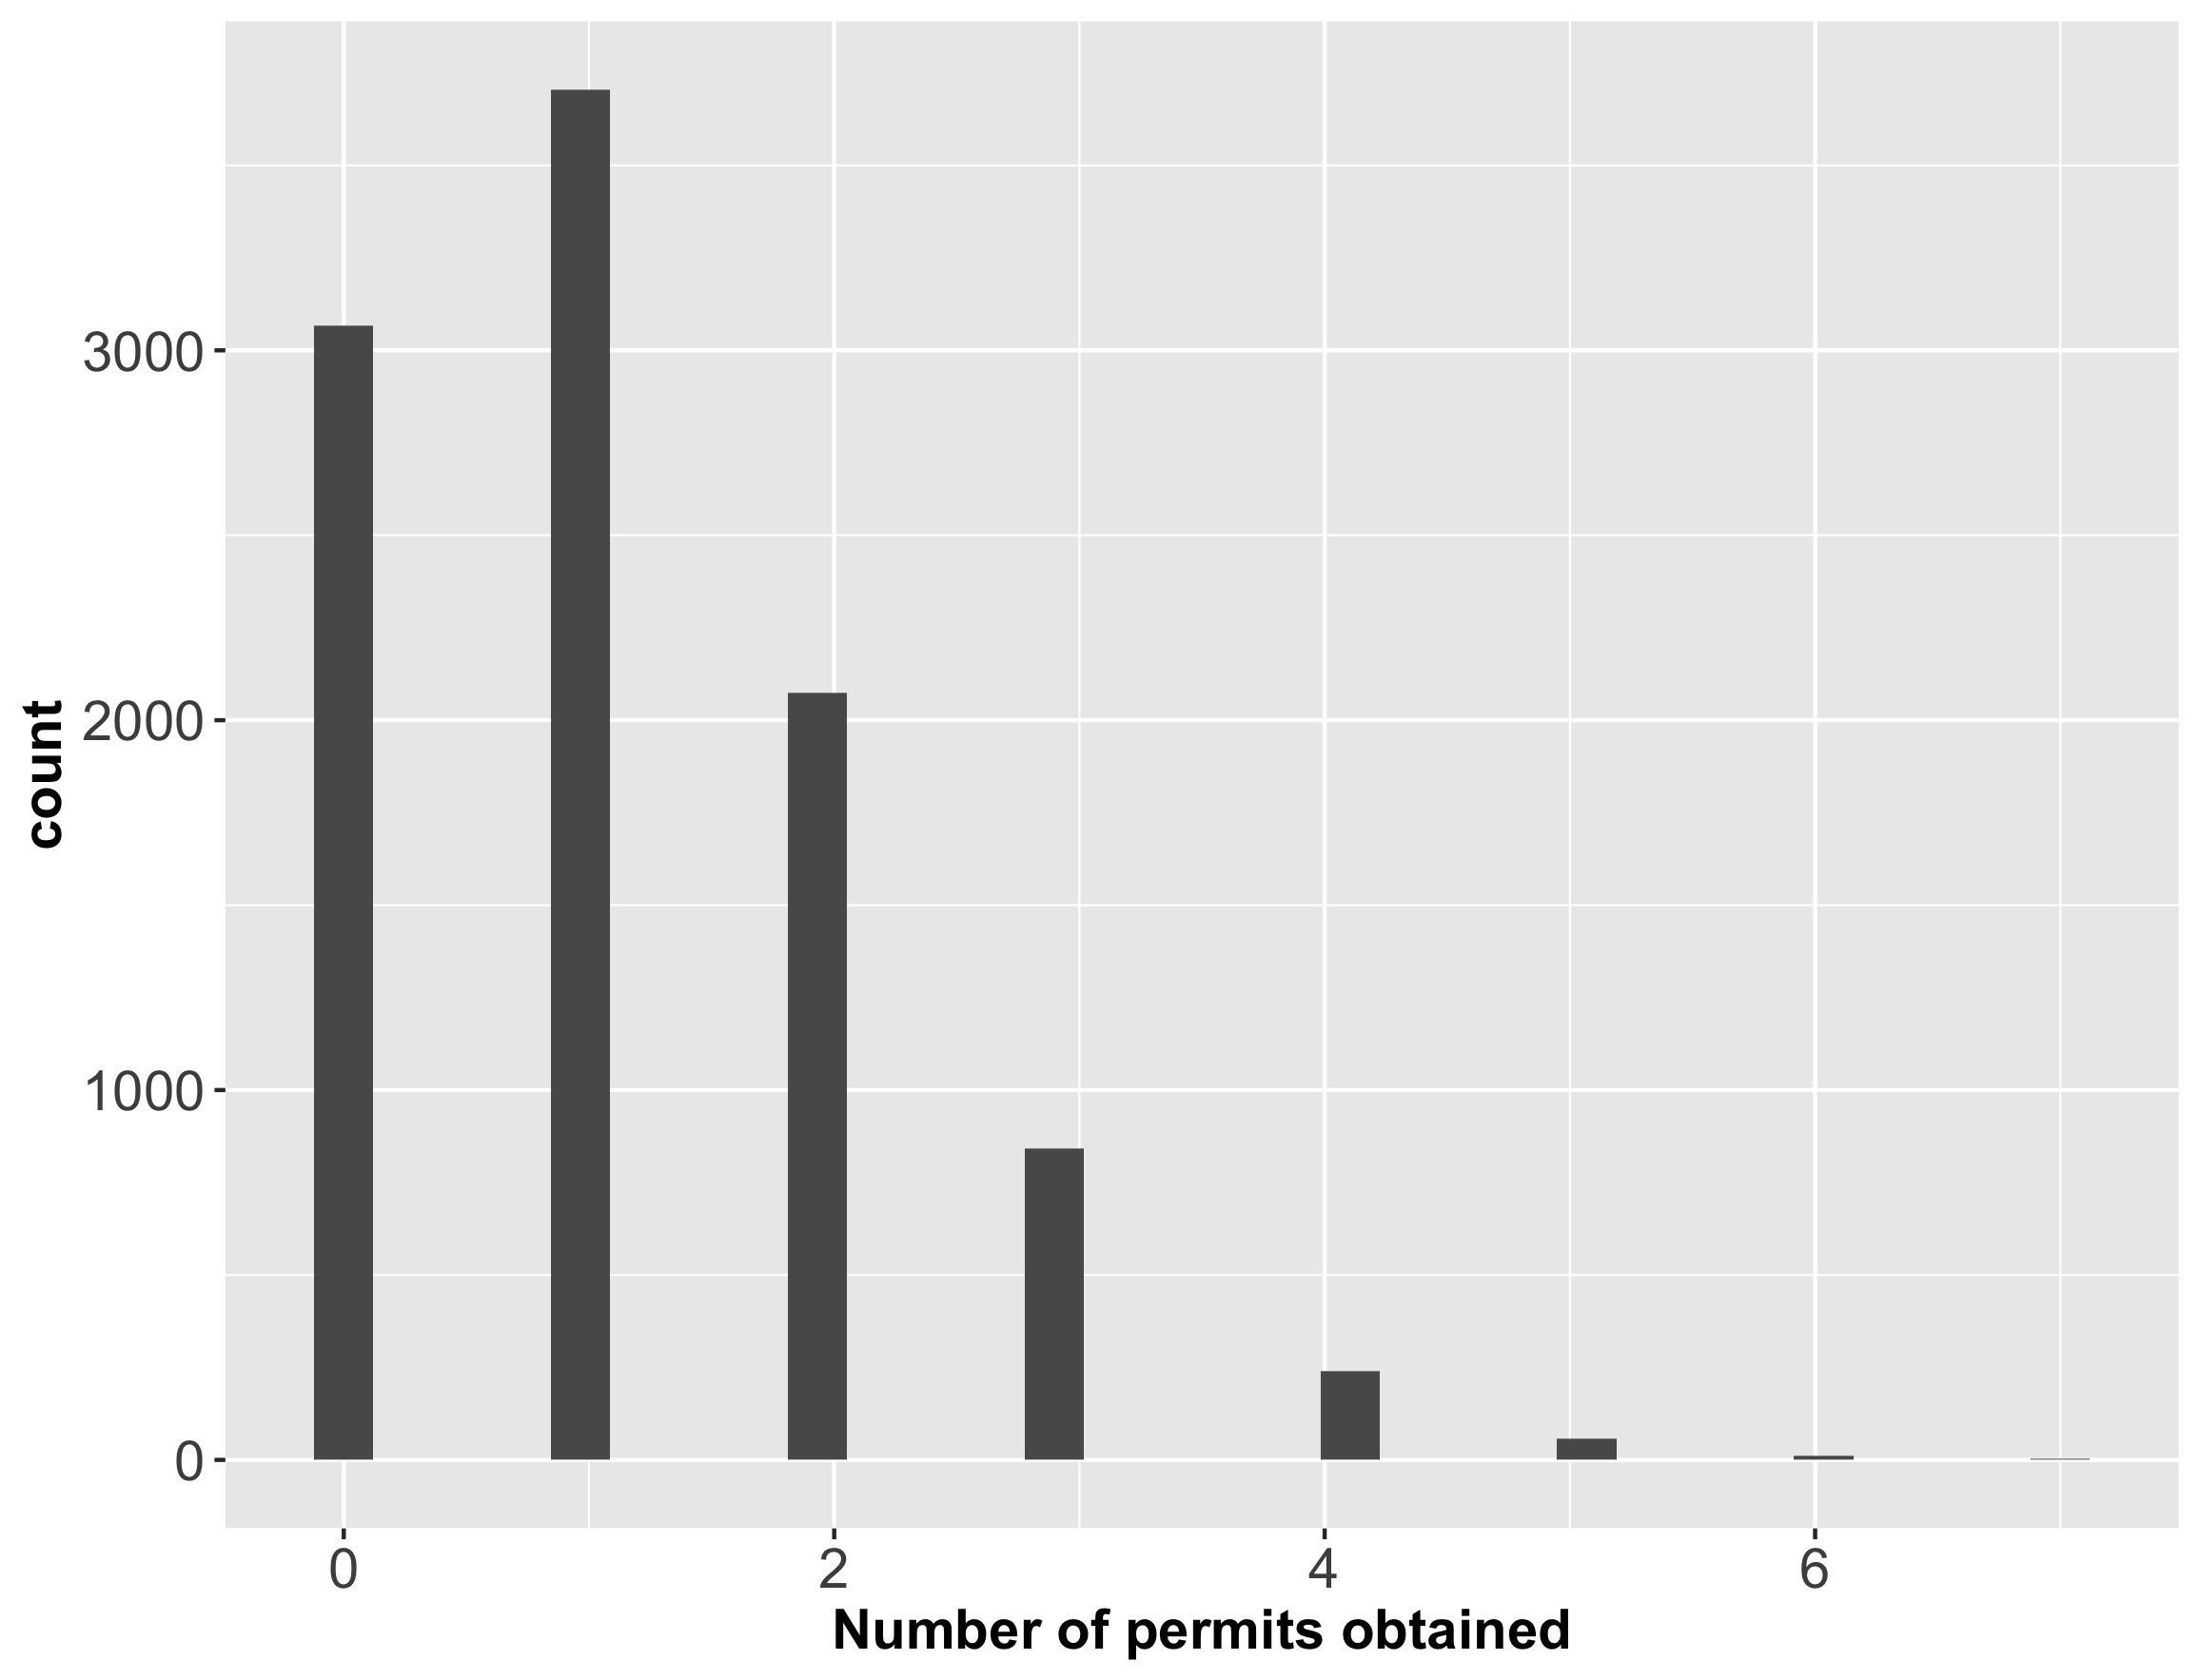 Histogram of number of permits obtained in simulation